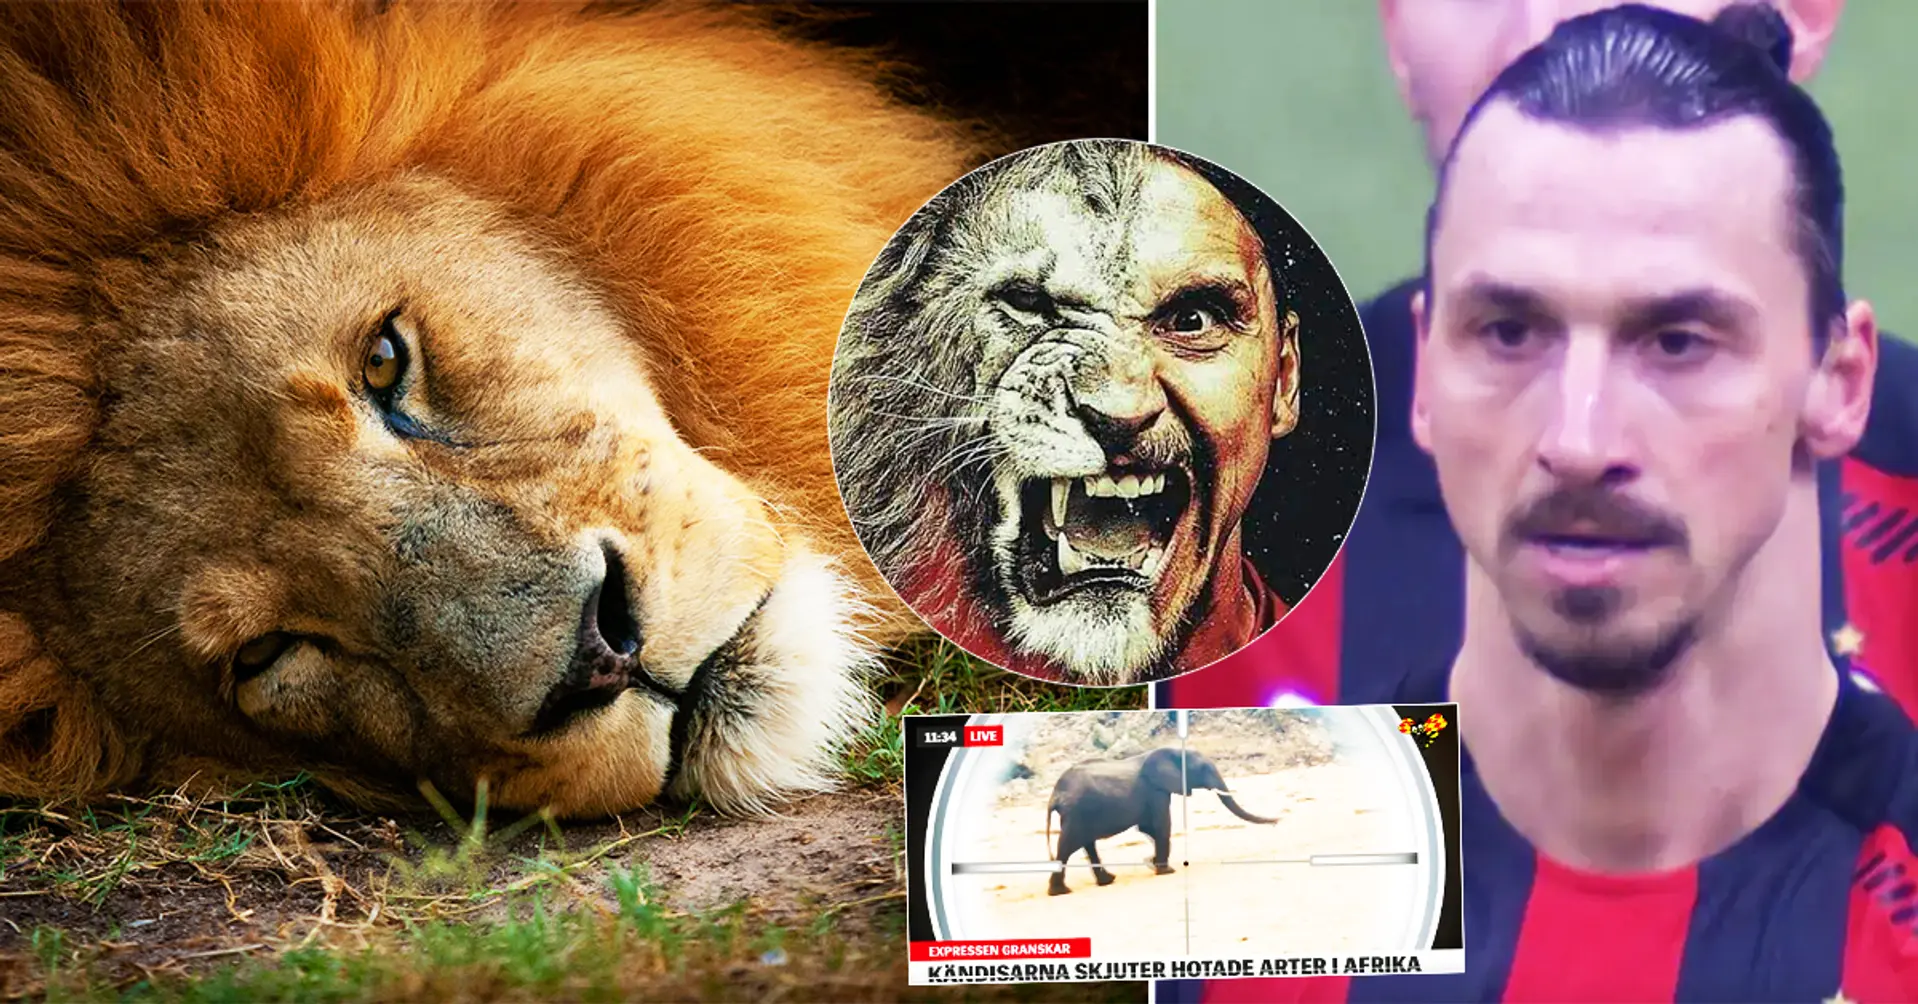 Ibrahimovic shot, killed and imported lion from Africa, took his skin and skull home - shocking reports from Sweden